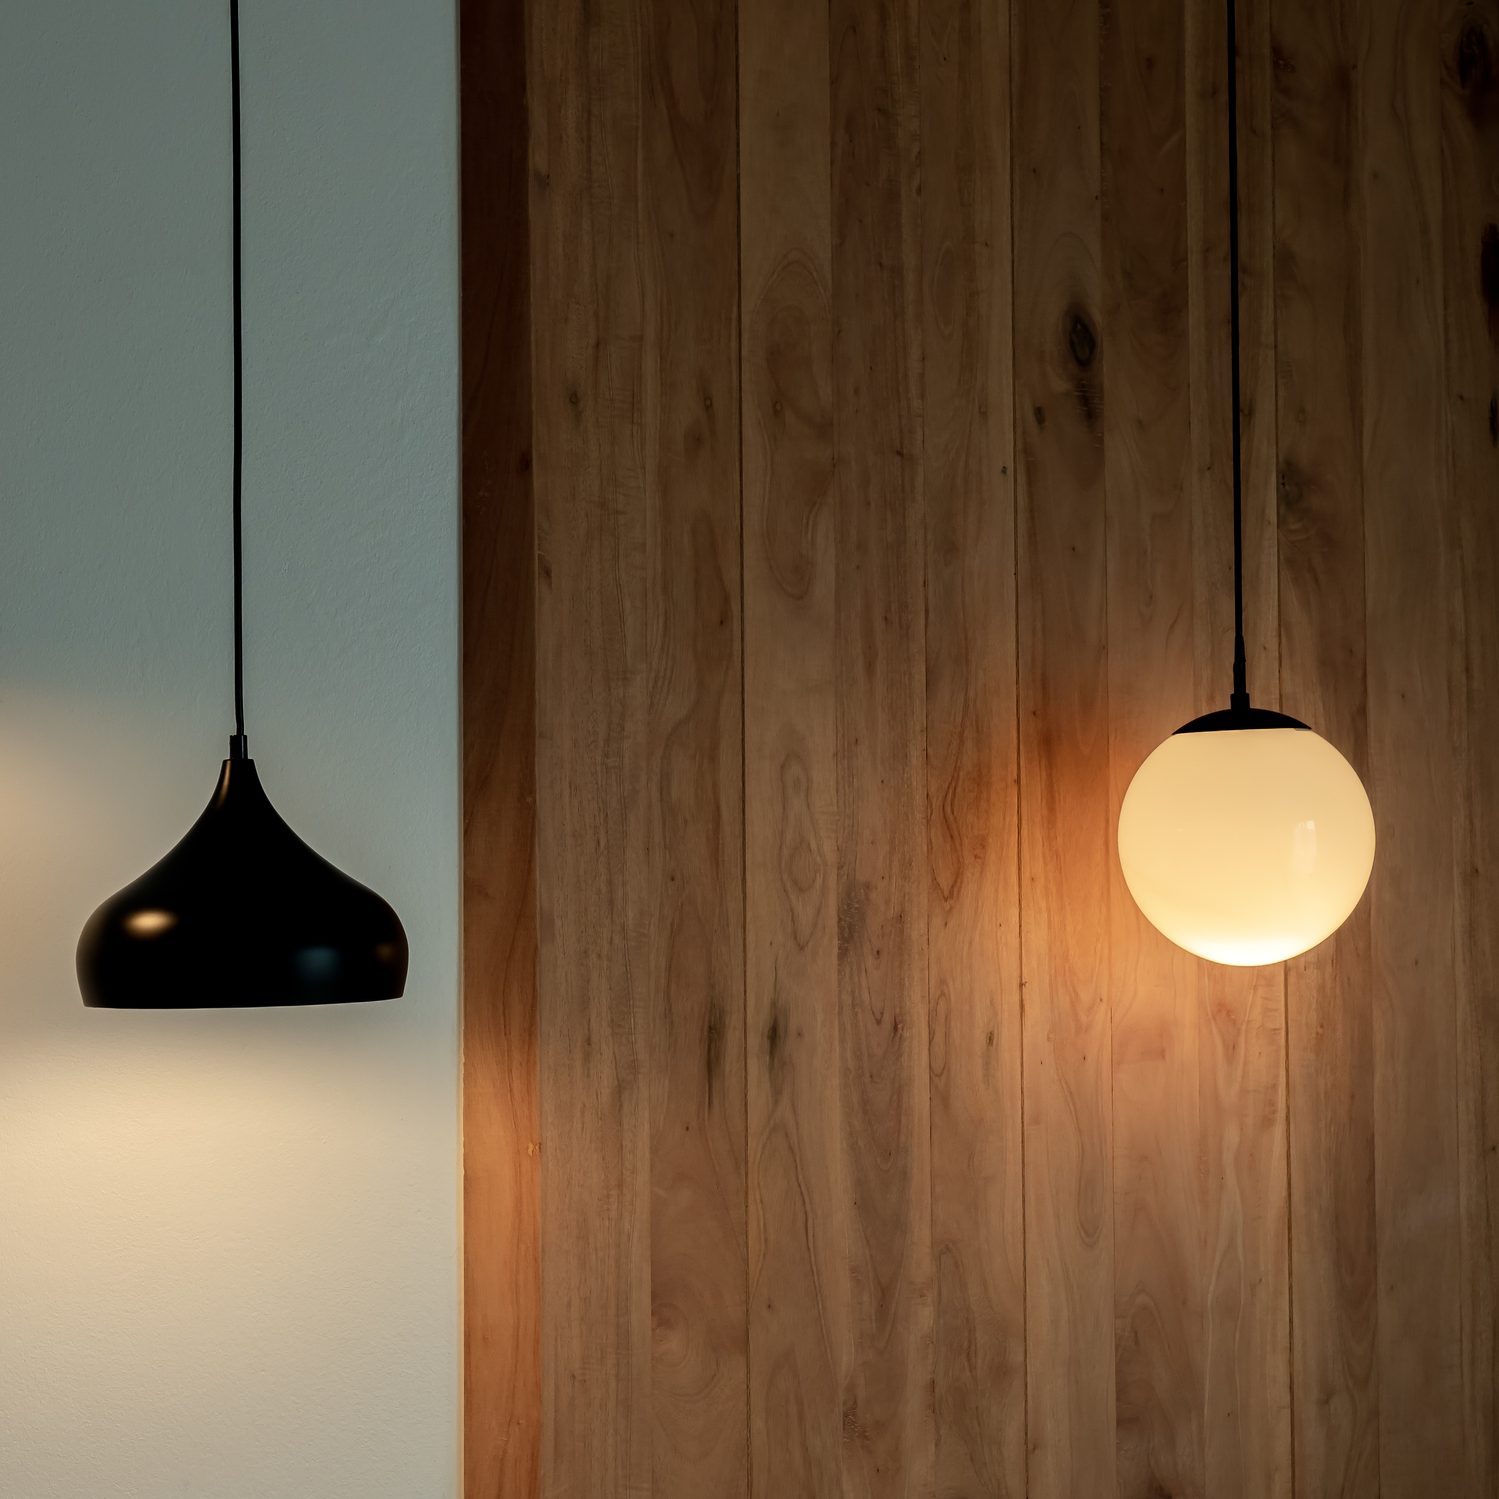 Twin ceiling lighting in the dark room. Two hanging lamp or round ceiling lamp decorated as a steps and round light full moon shape on white and wood wall.